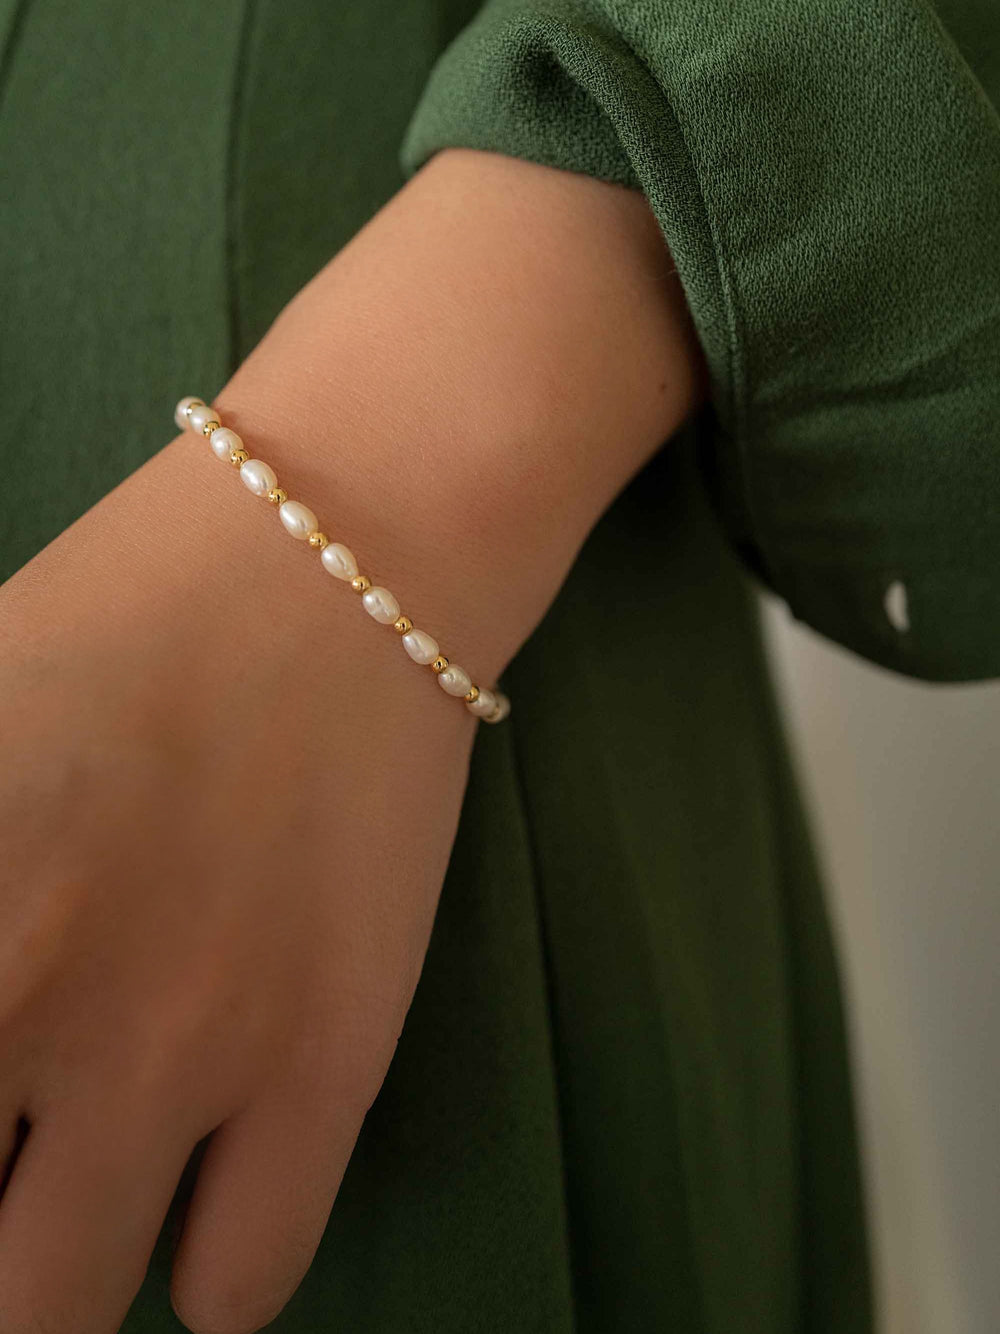 Wearing a freshwater pearl bracelet on her hand